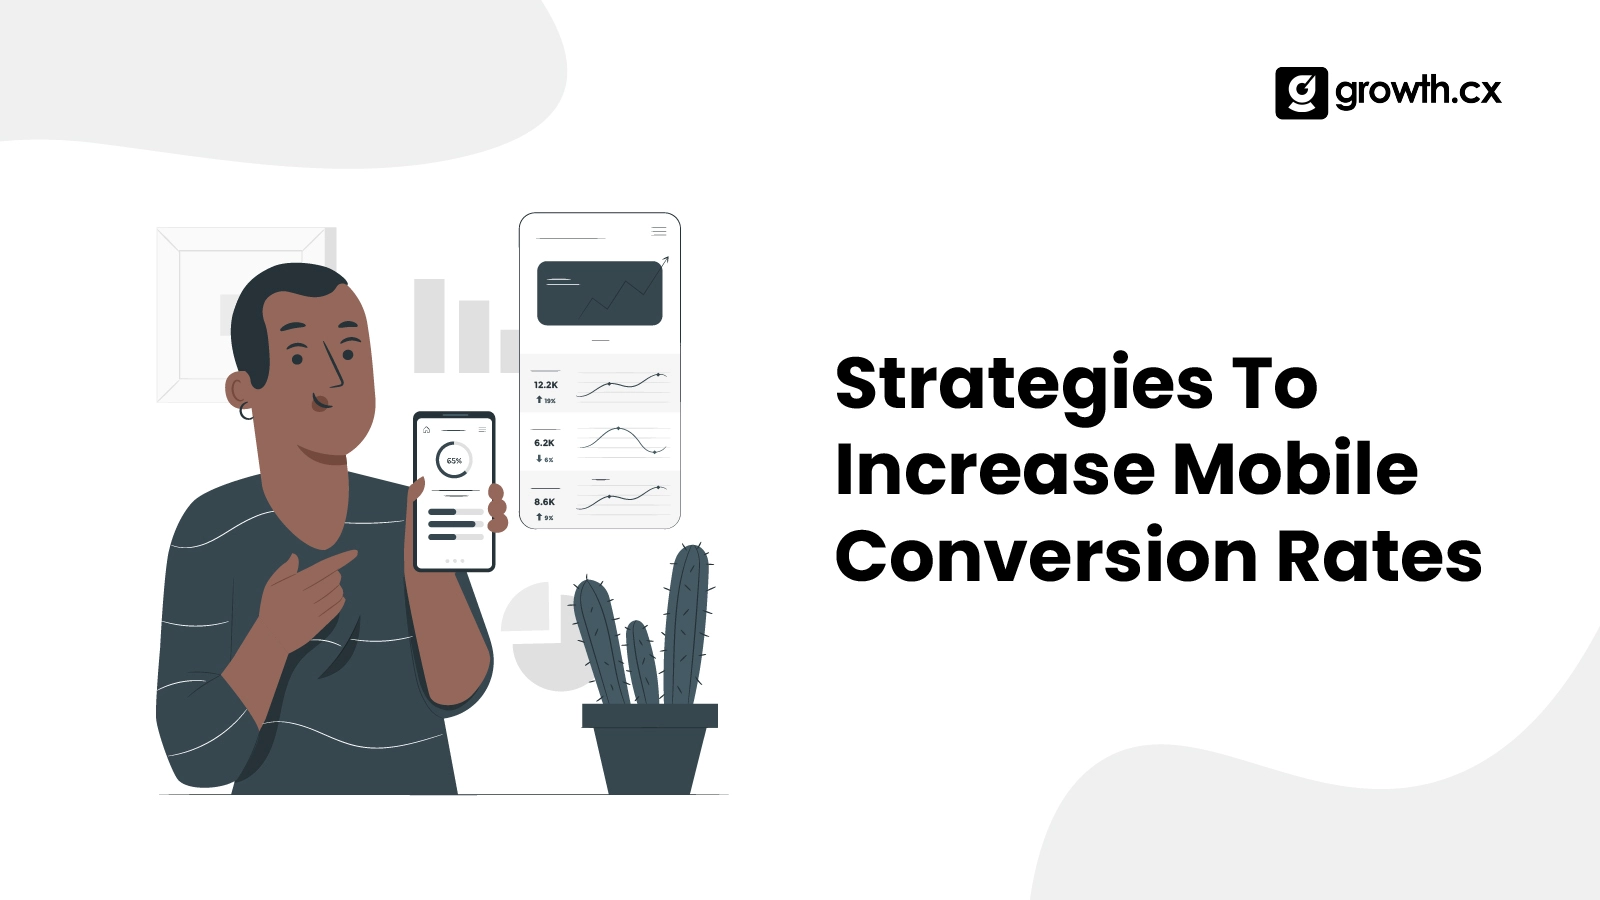 Strategies To Increase Mobile Conversion Rates